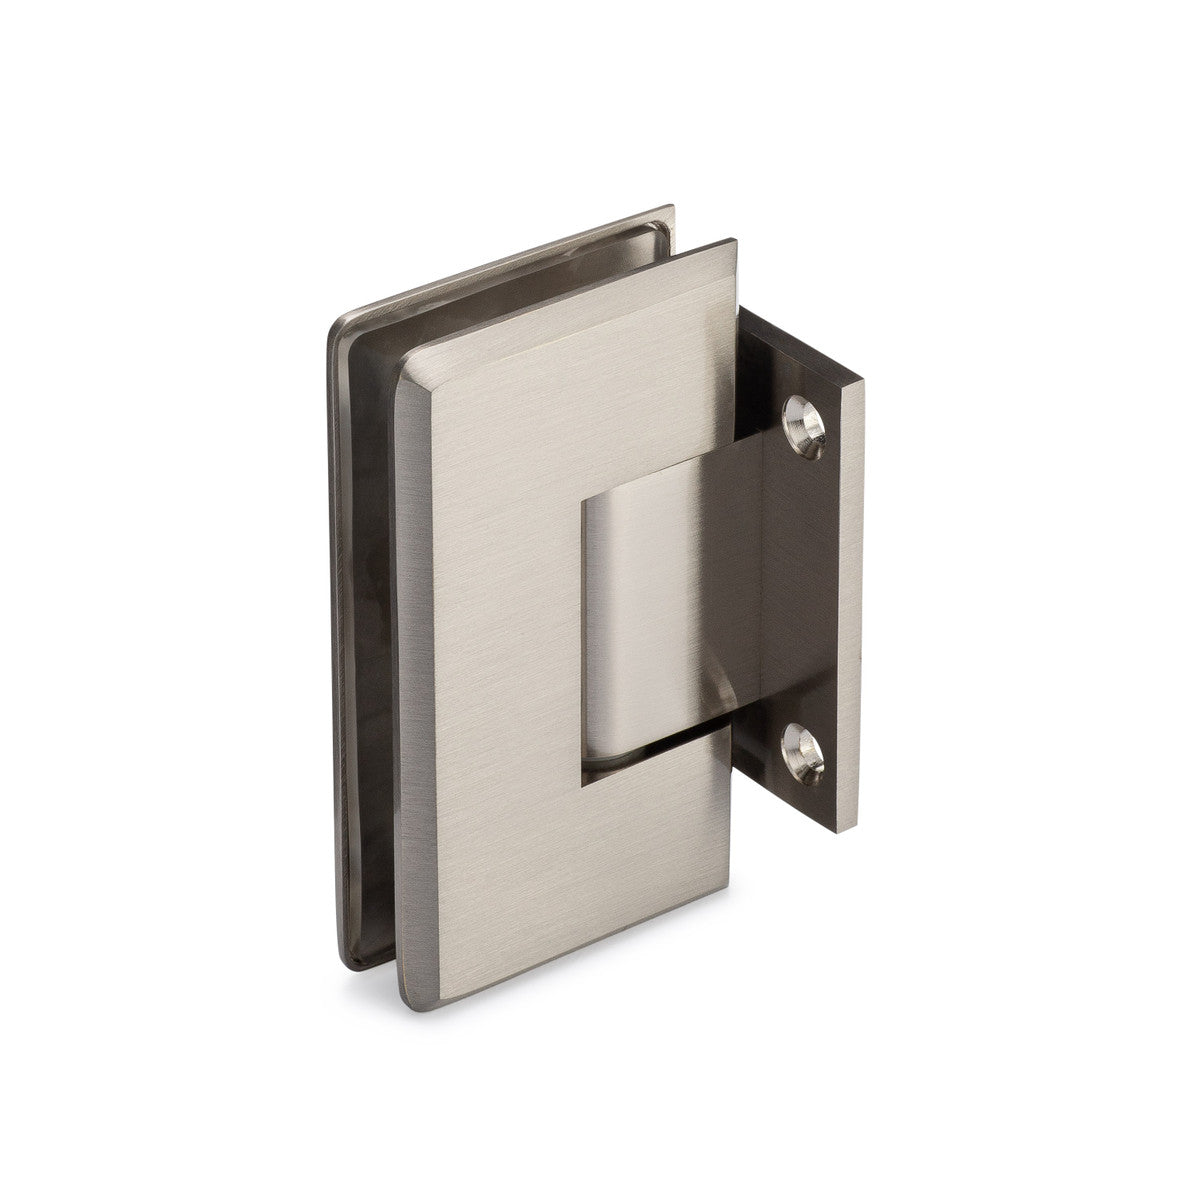 Oceana Heavy Duty 90° Wall-Glass Hinge with Short Backplate & 5° Offset - Brushed Nickel